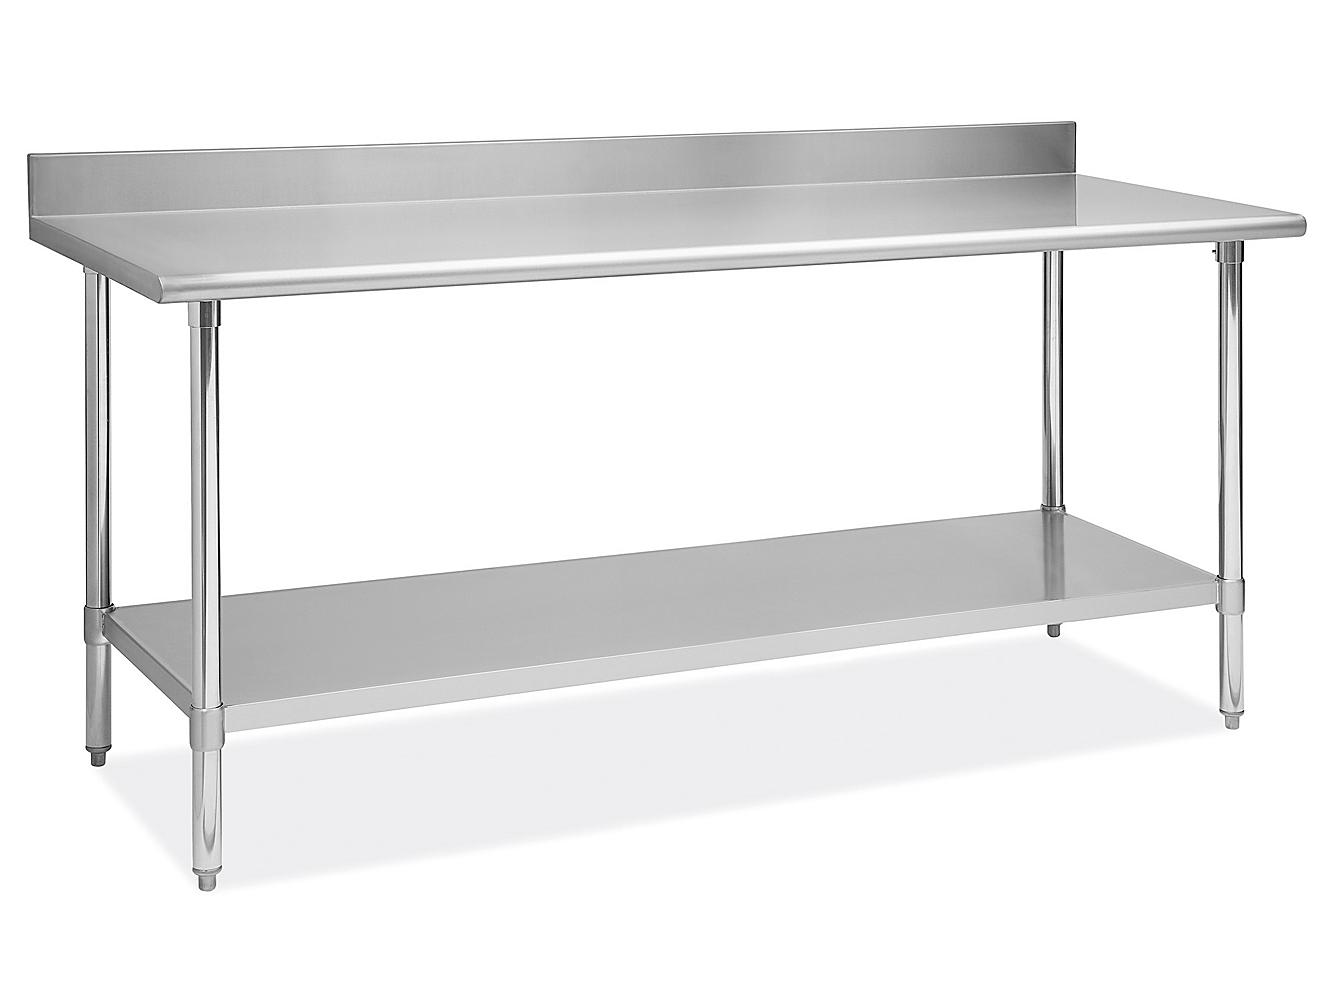 deluxe-stainless-steel-worktable-with-backsplash-and-bottom-shelf-72